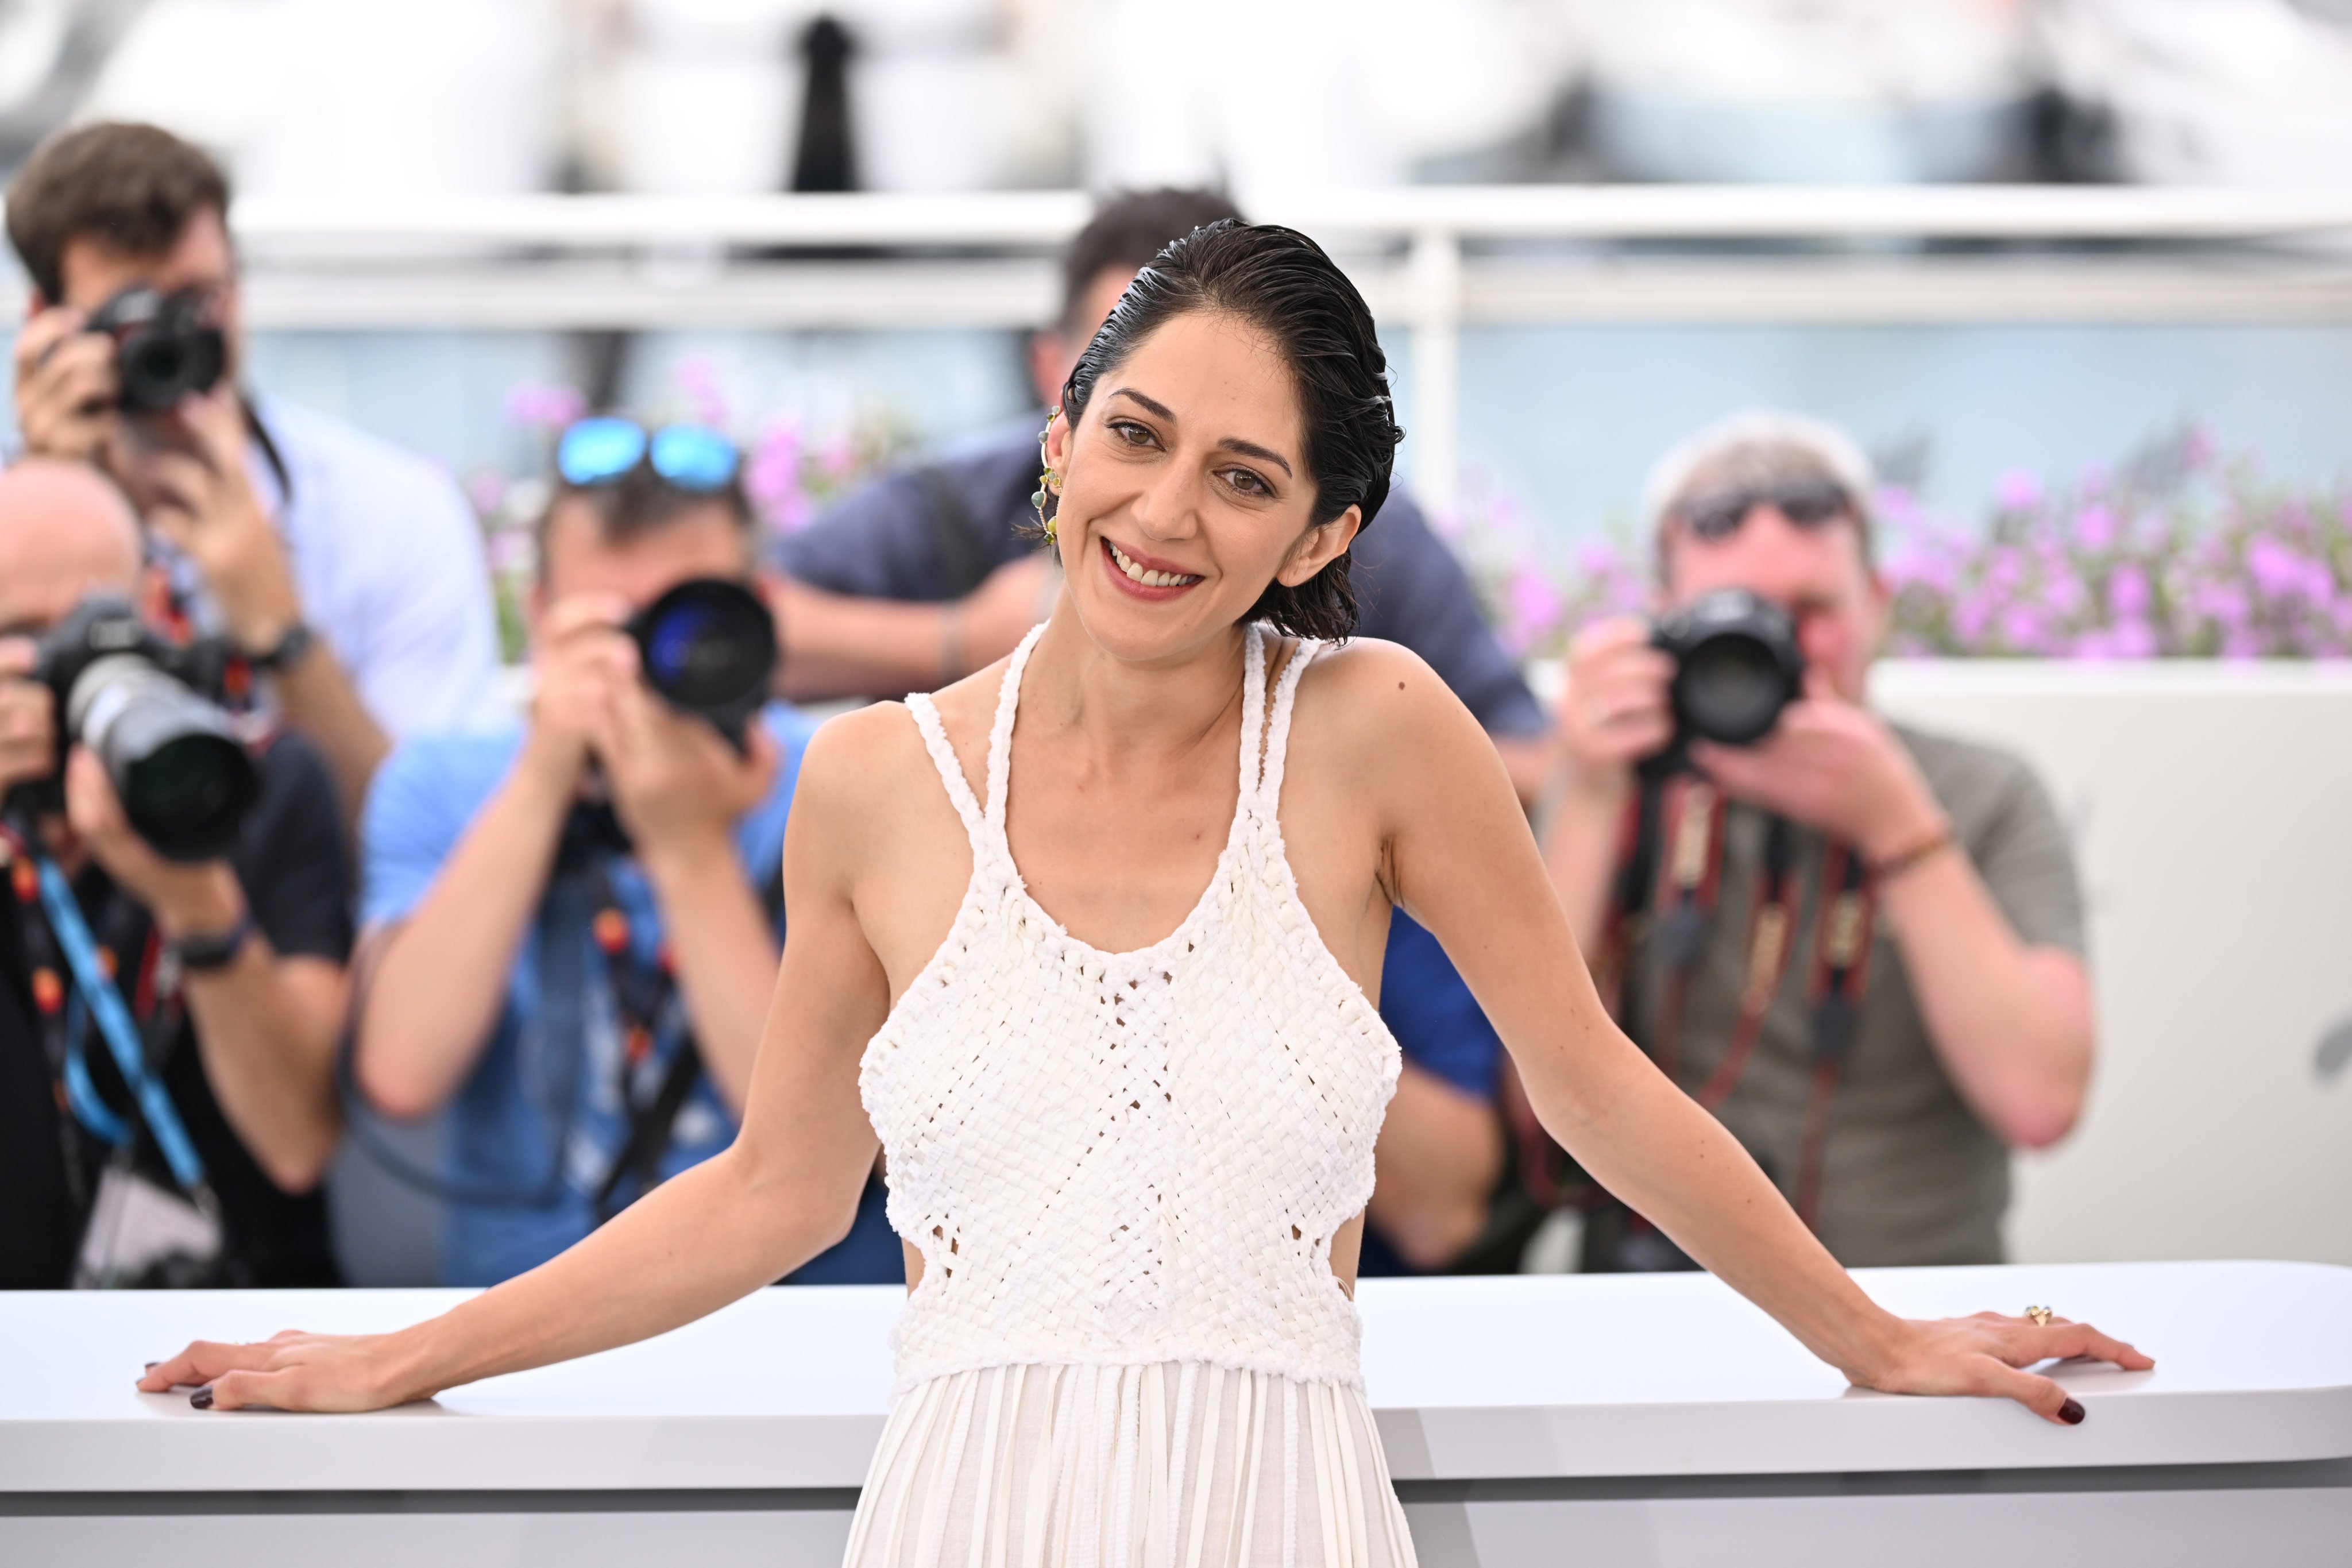 Iranian-French actress Zar Amir Ebrahimi at the 75th Cannes Film Festival in France on May 23, 2022, where she won the best actress award for her role in Holy Spider. She recently attended the Hong Kong International Film Festival, which was showing Shayda, in which she stars. Photo: Getty Images